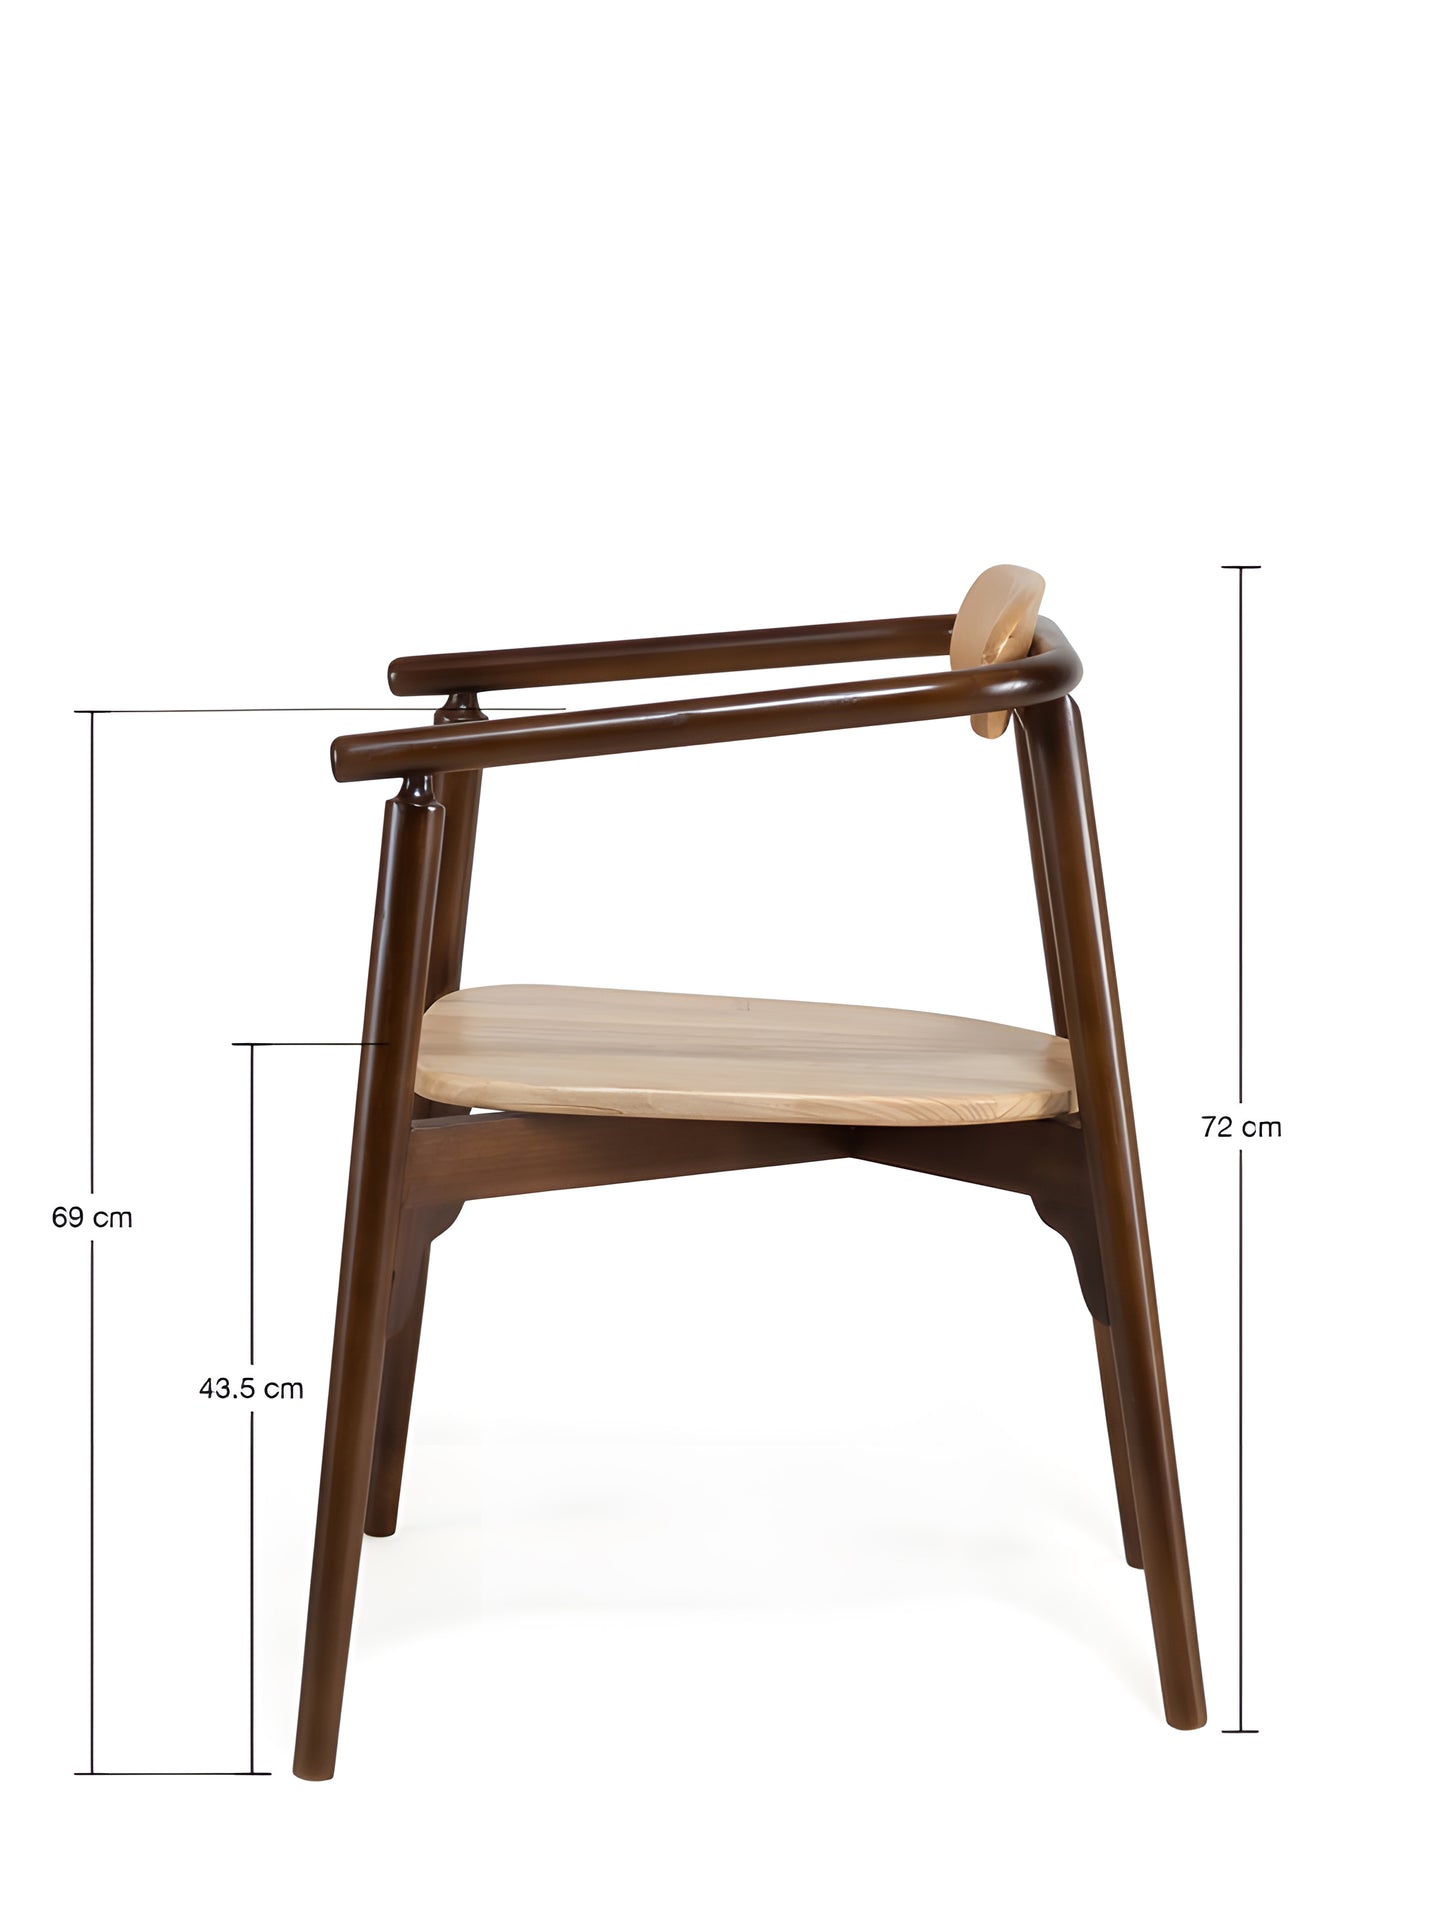 Ibanez Sungkai Wood Dining Chair with painted brown armrest and legs side view with measurement by Mellowdays Furniture